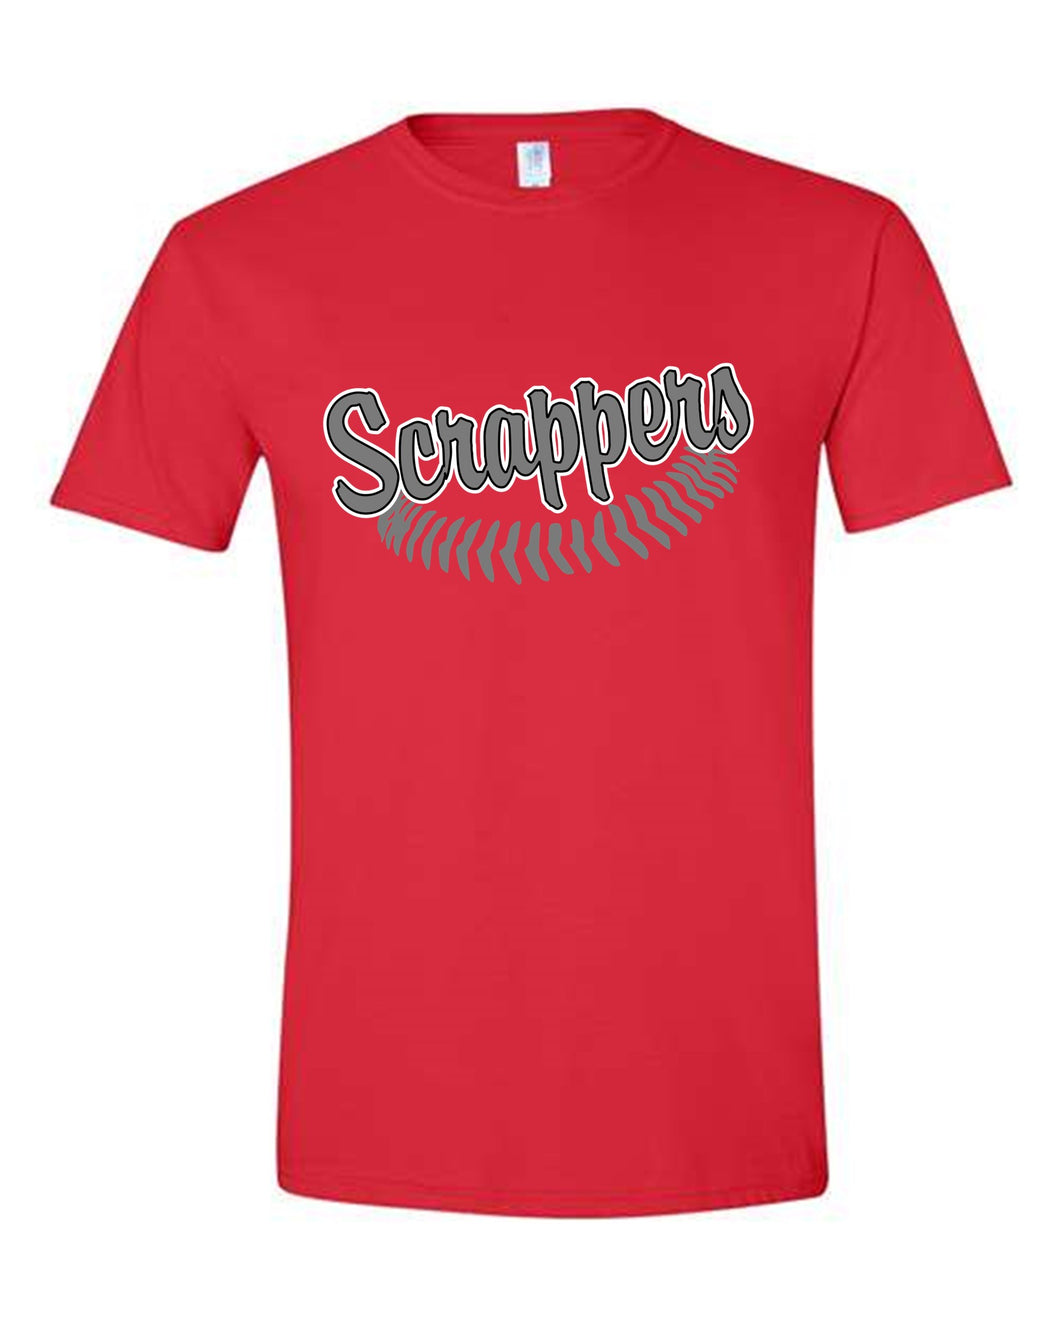 Scrappers Baseball Short Sleeve - Youth and Adult